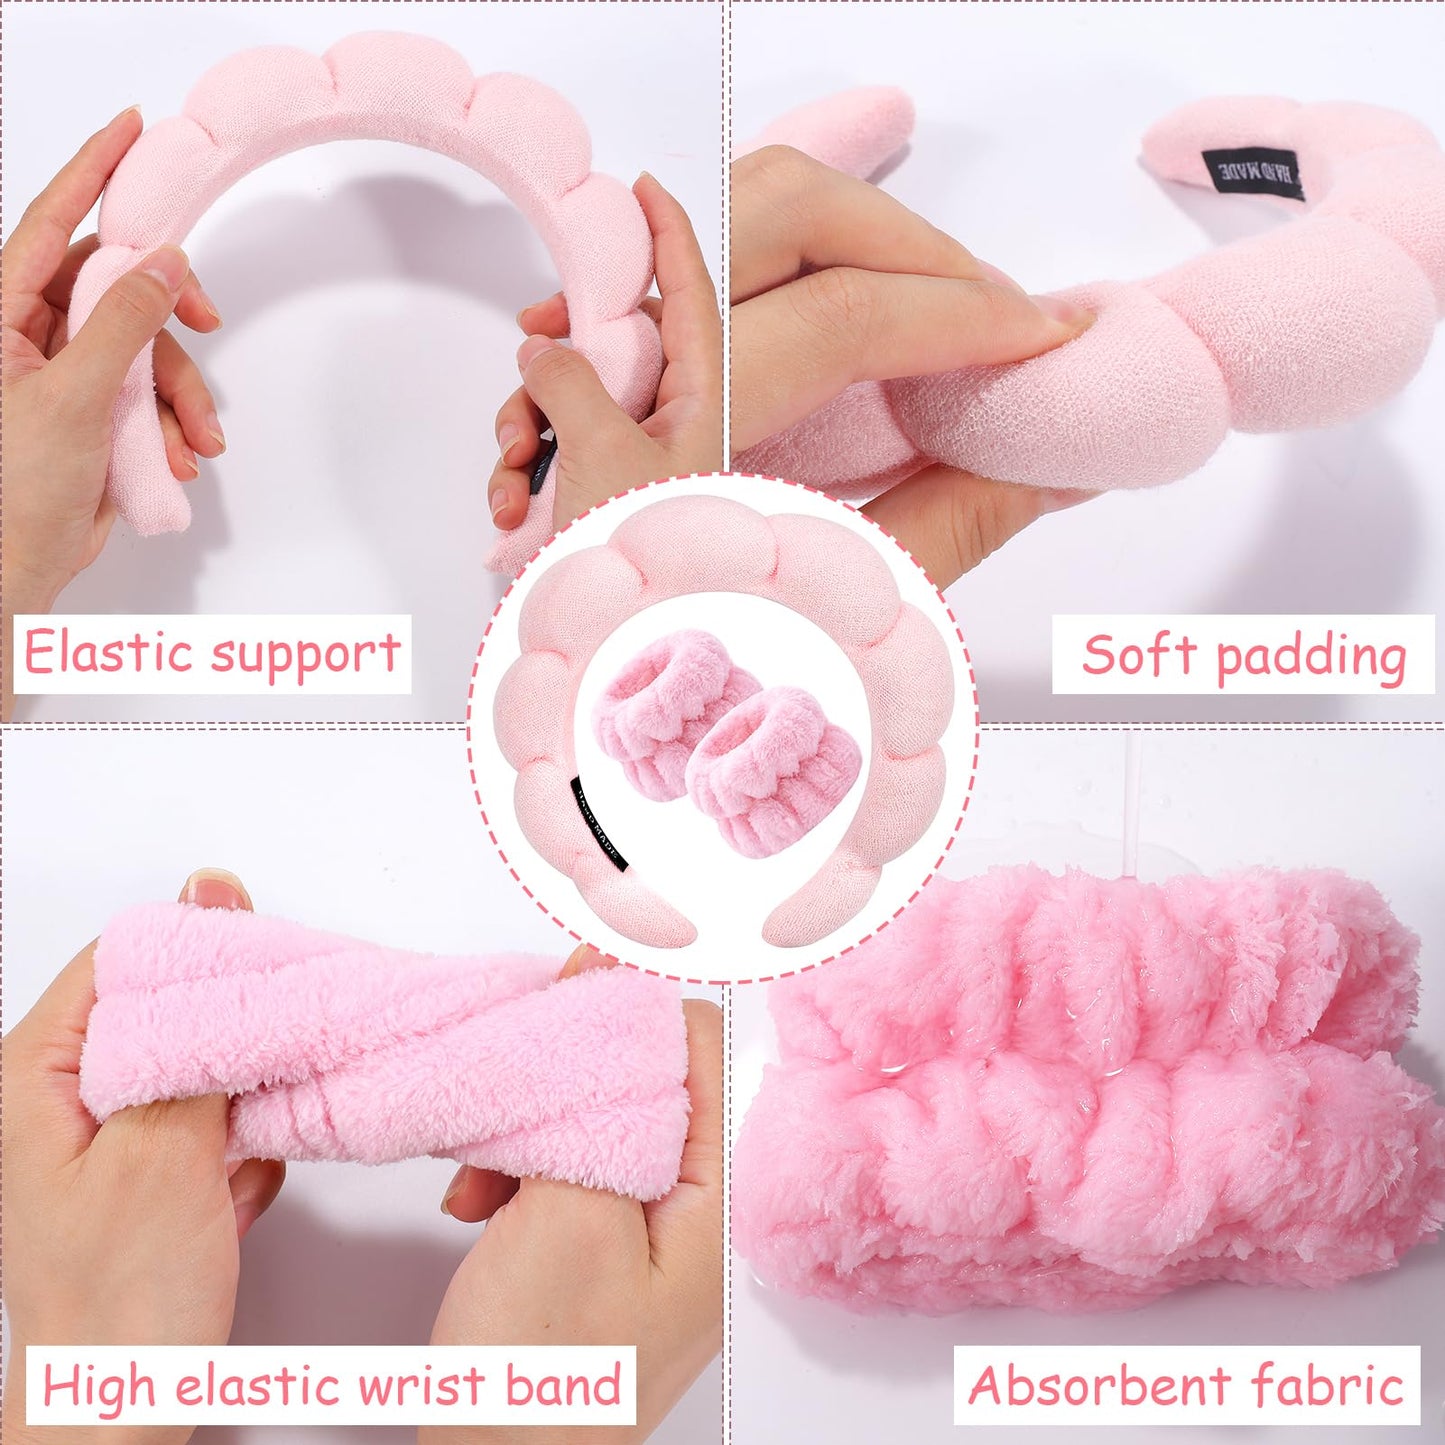 Zkptops Spa Headband for Washing Face Wristband Sponge Makeup Skincare Headband Terry Cloth Bubble Soft Get Ready Hairband for Women Girl Puffy Padded Headwear Non Slip Thick Hair Accessory(Pink)